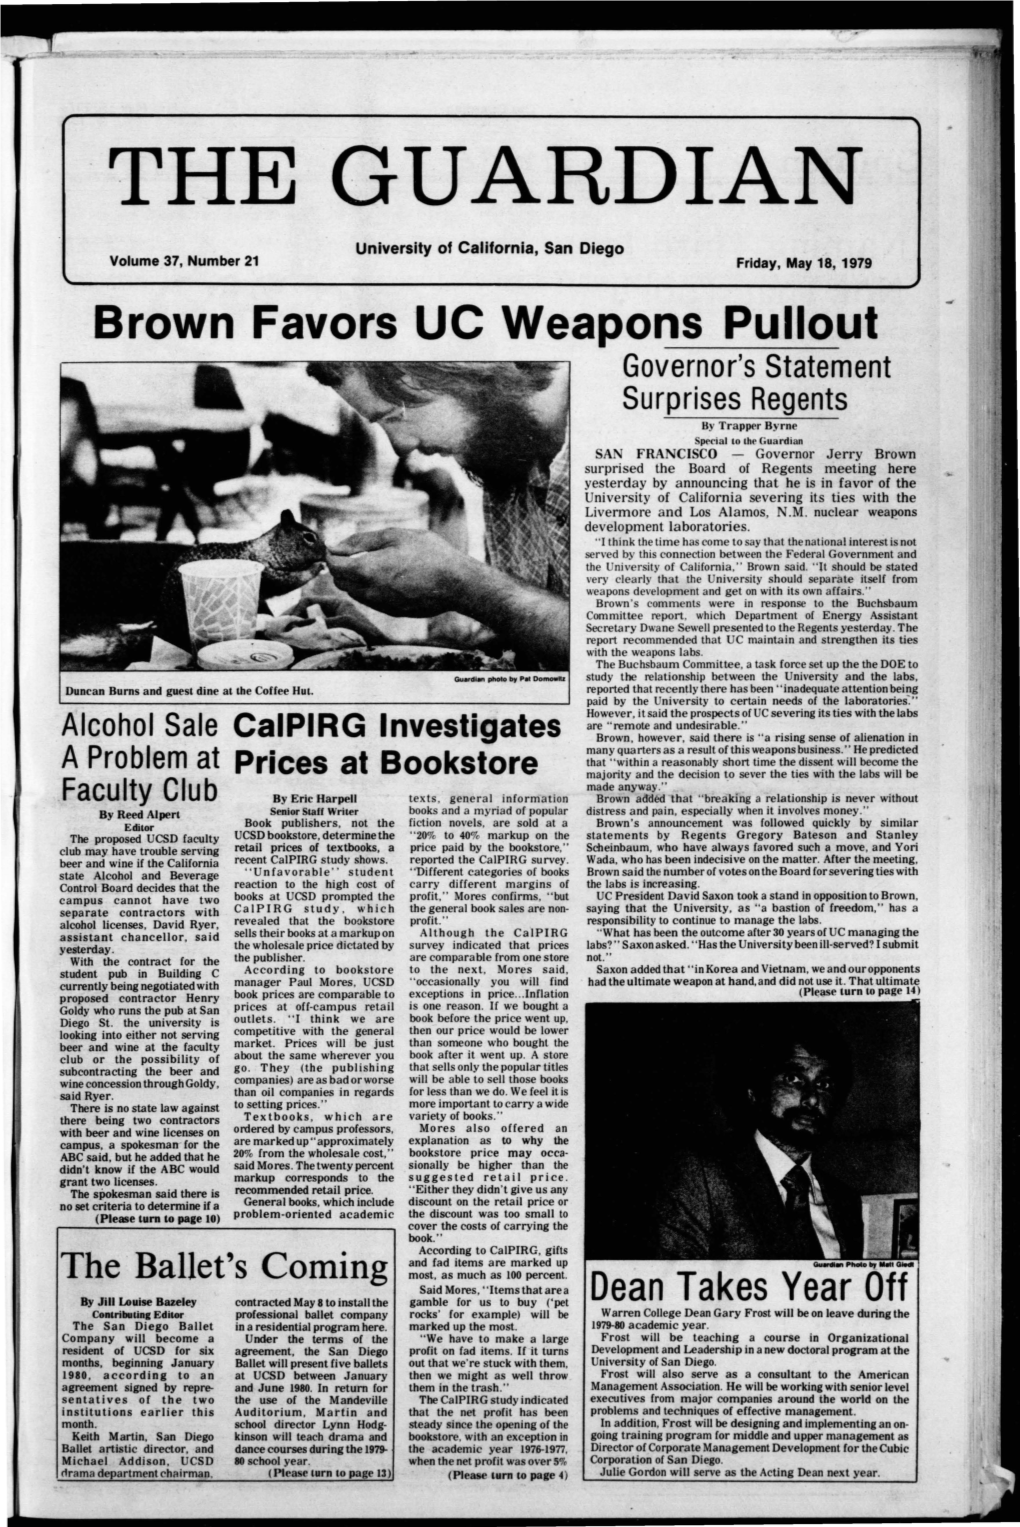 Brown Favors UC Weapons Pullout